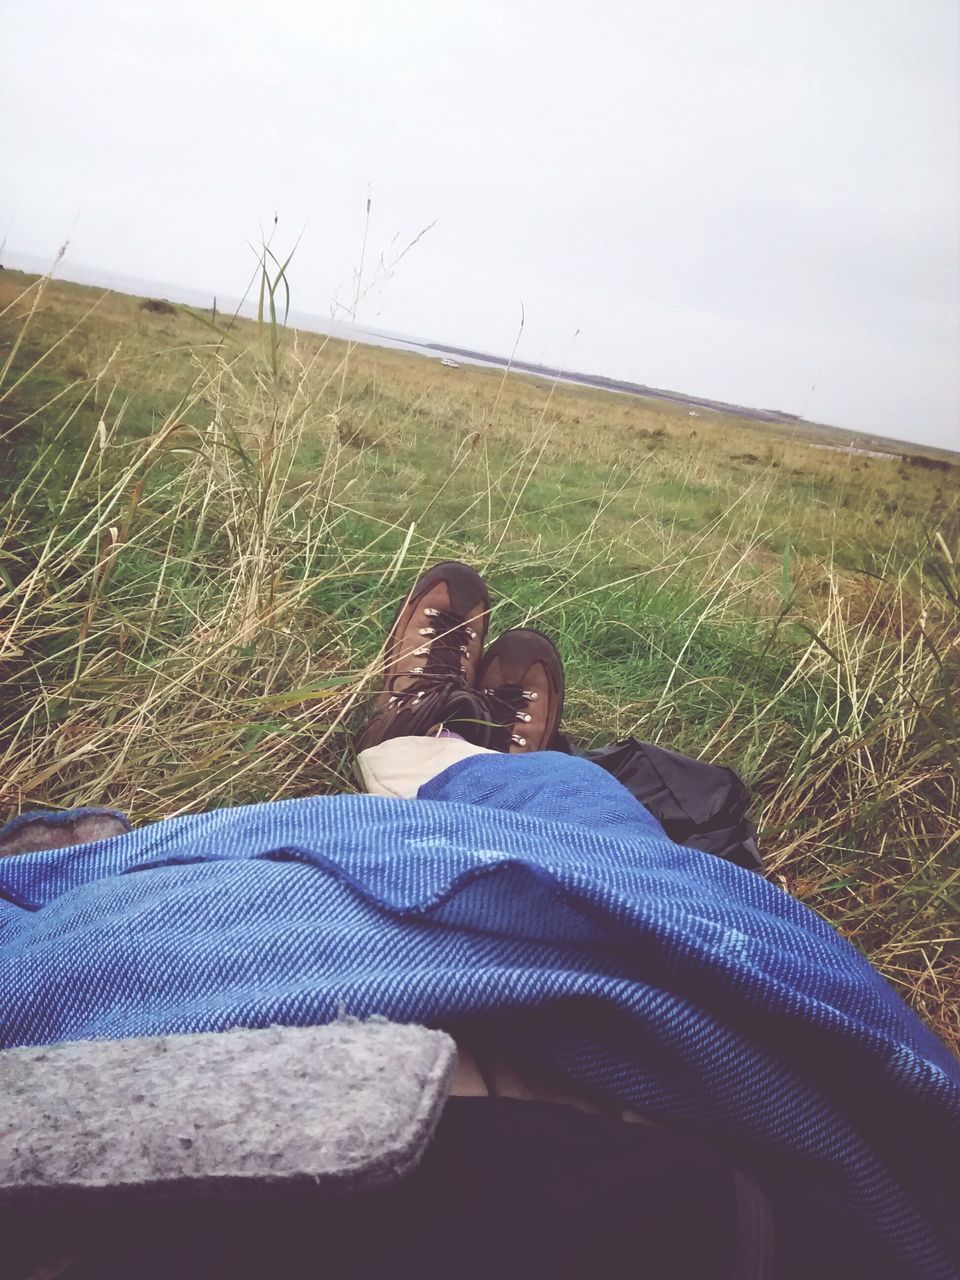 low section, grass, lifestyles, person, leisure activity, relaxation, field, sitting, grassy, shoe, personal perspective, casual clothing, men, resting, landscape, nature, relaxing